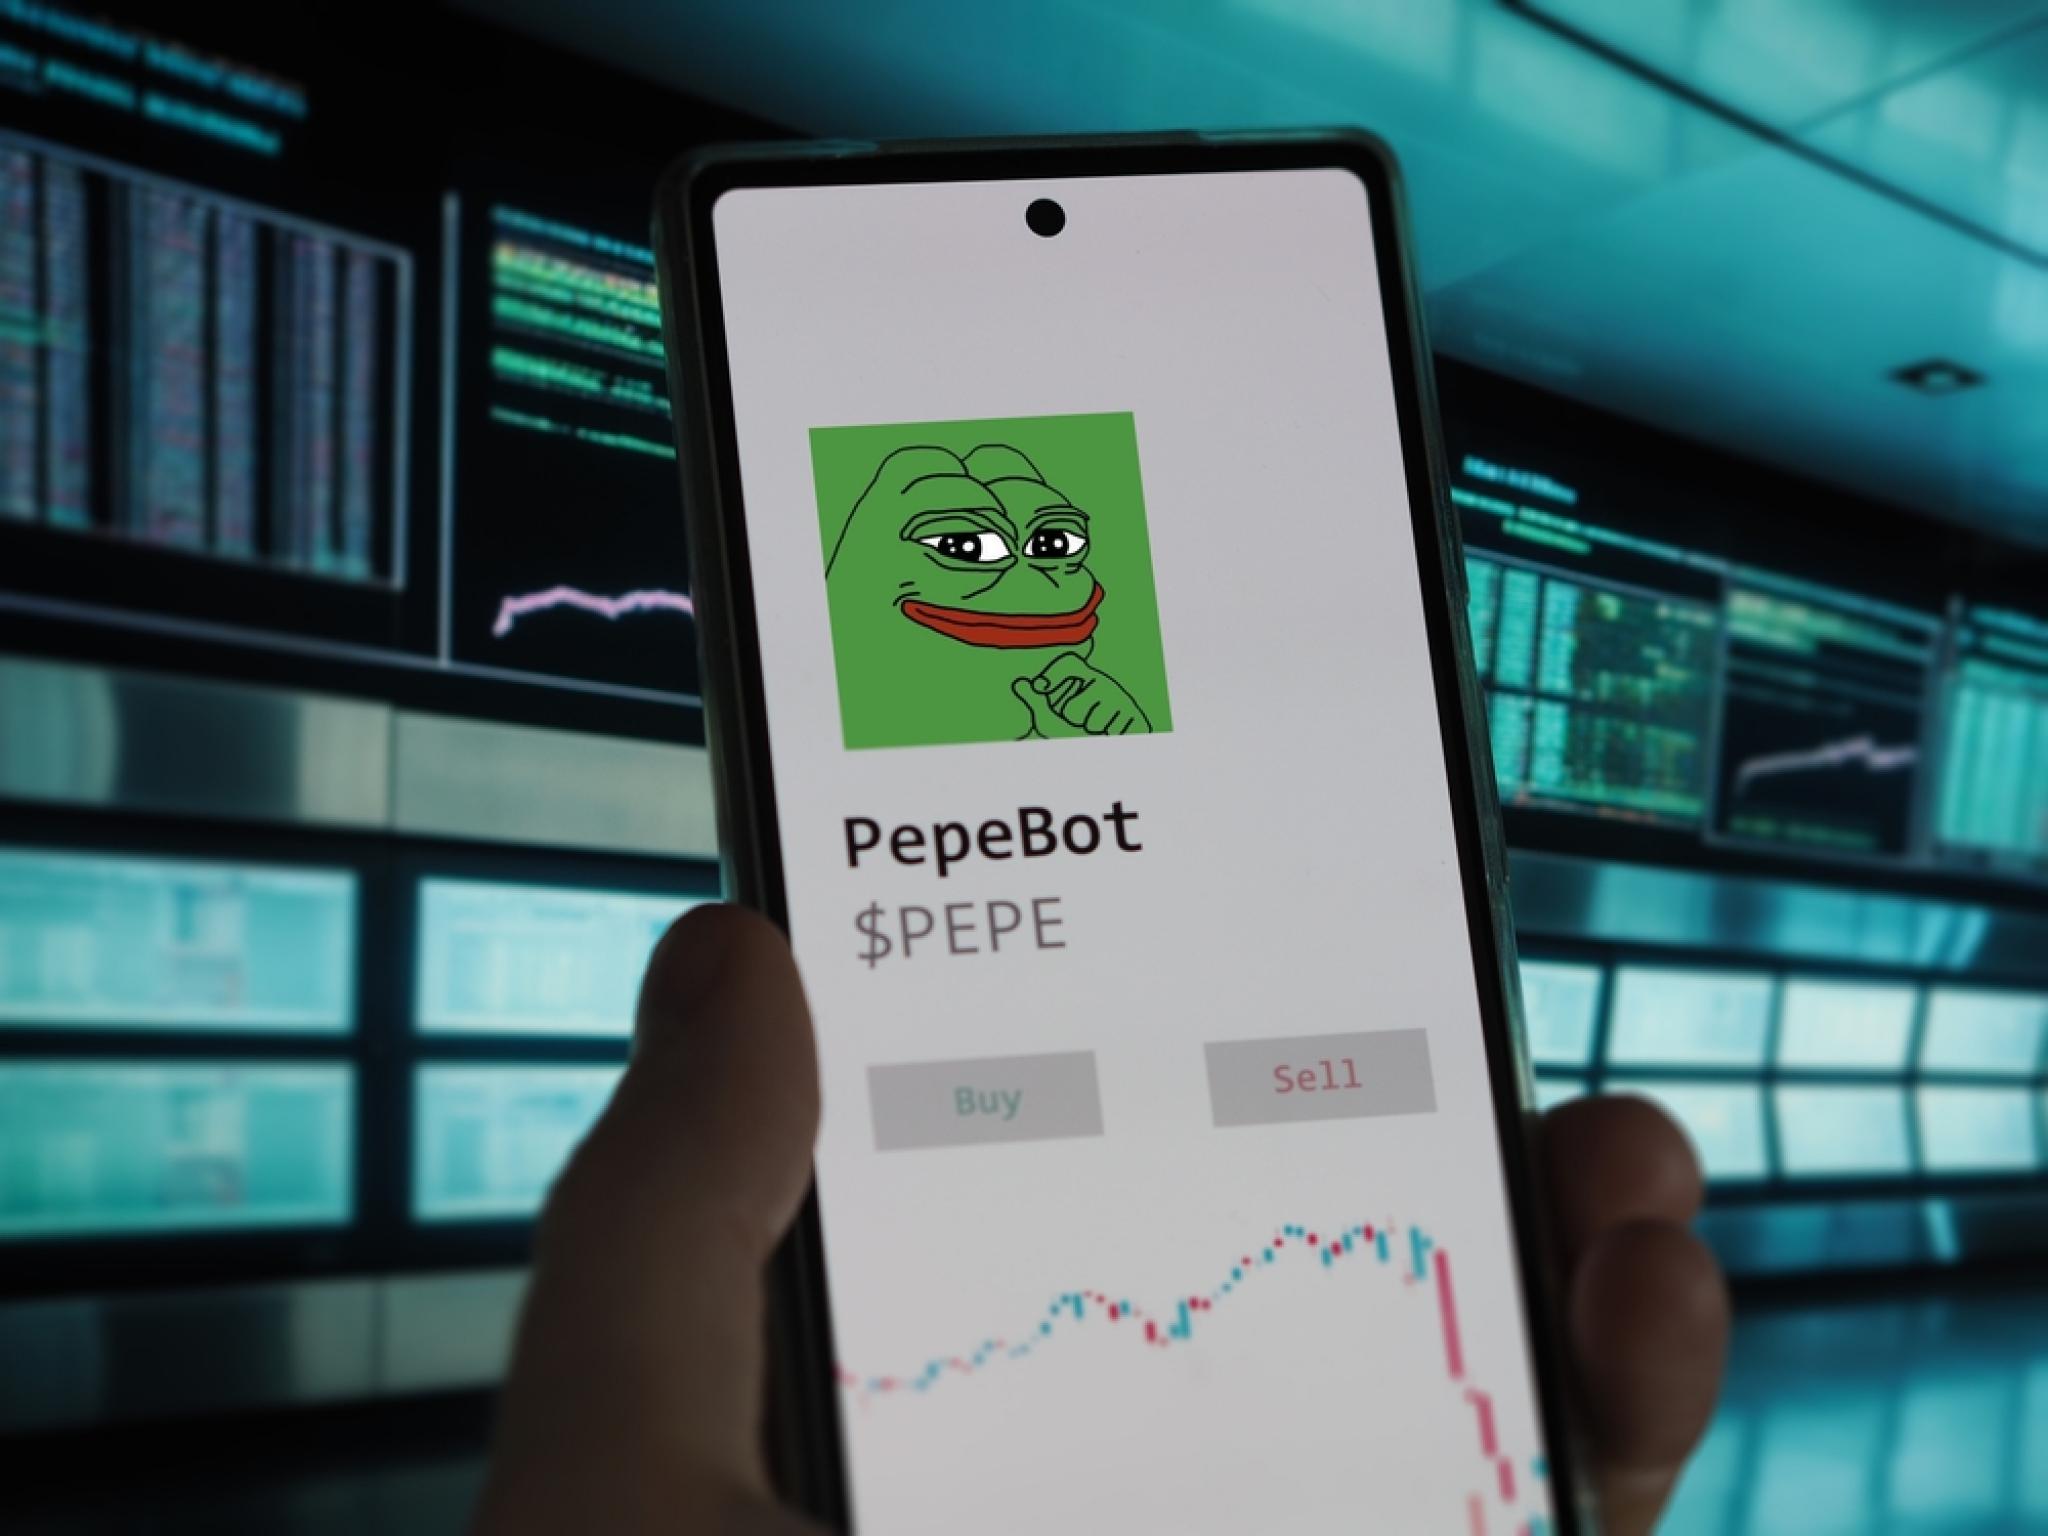  pepe-up-50-on-the-week-cult-community-may-flip-shib-and-possibly-even-doge-predicts-influential-trader 